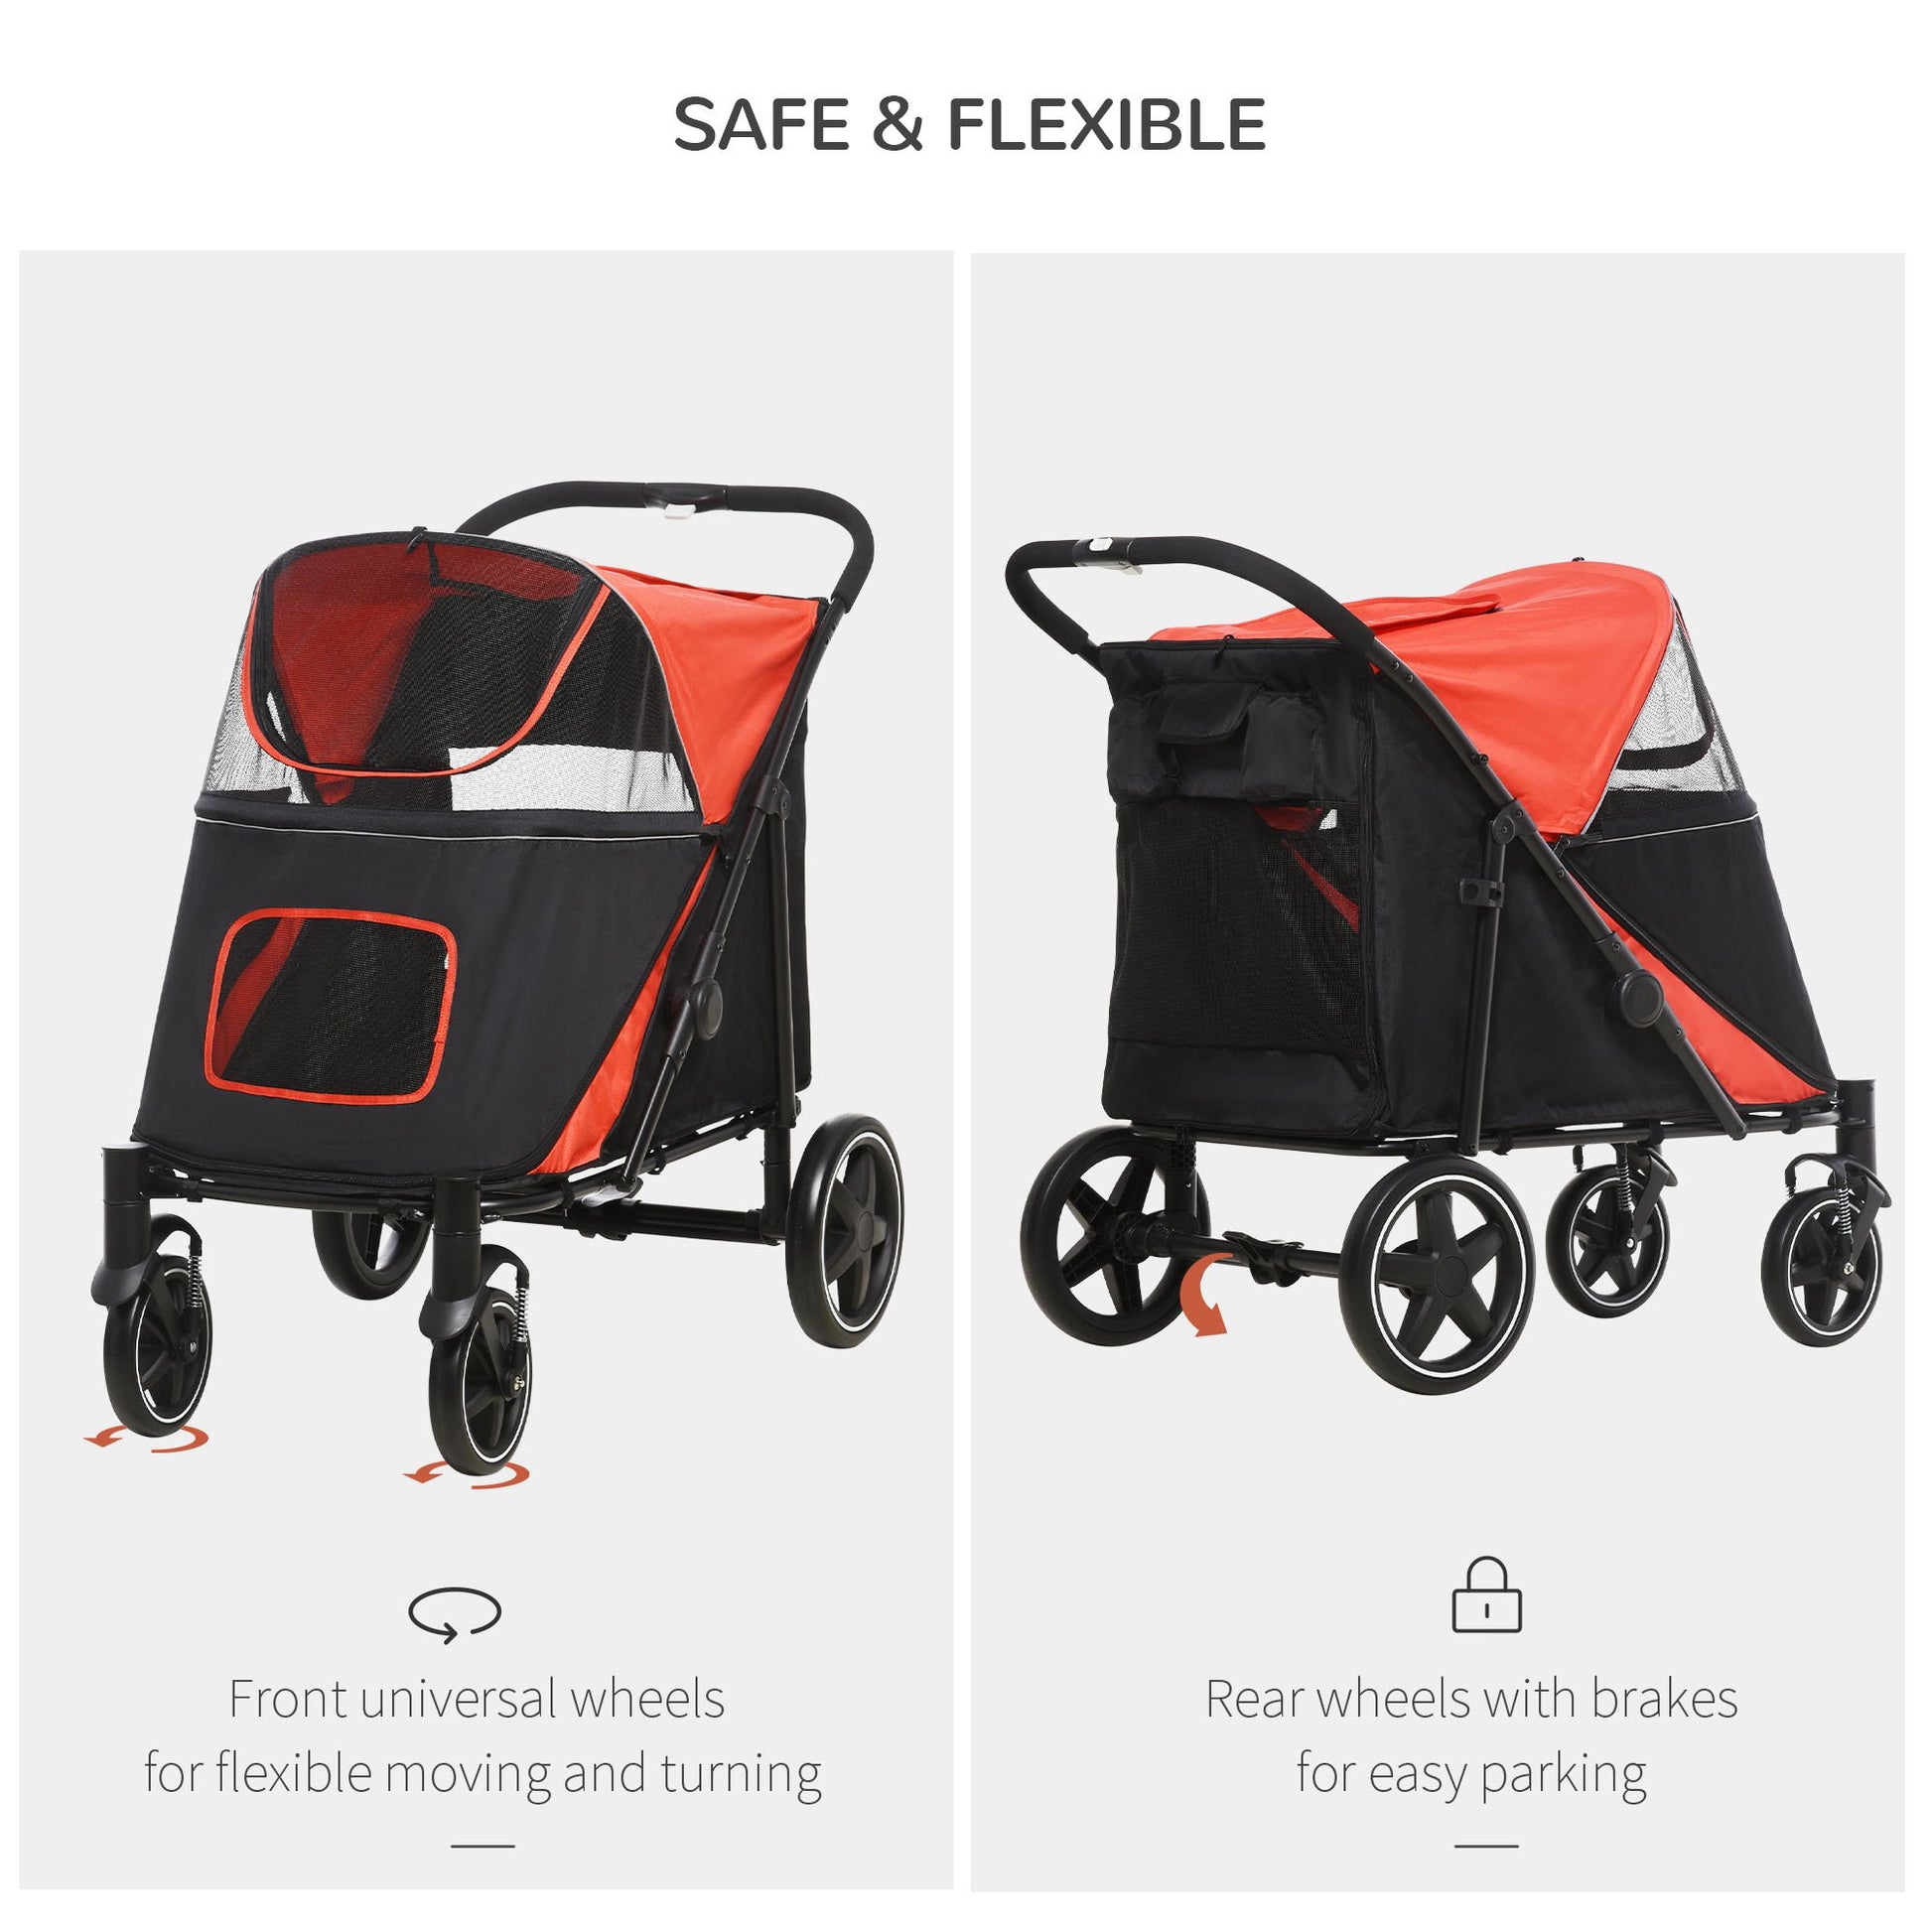 Pet Stroller - Foldable Dog Stroller With 2 Safety Lashes